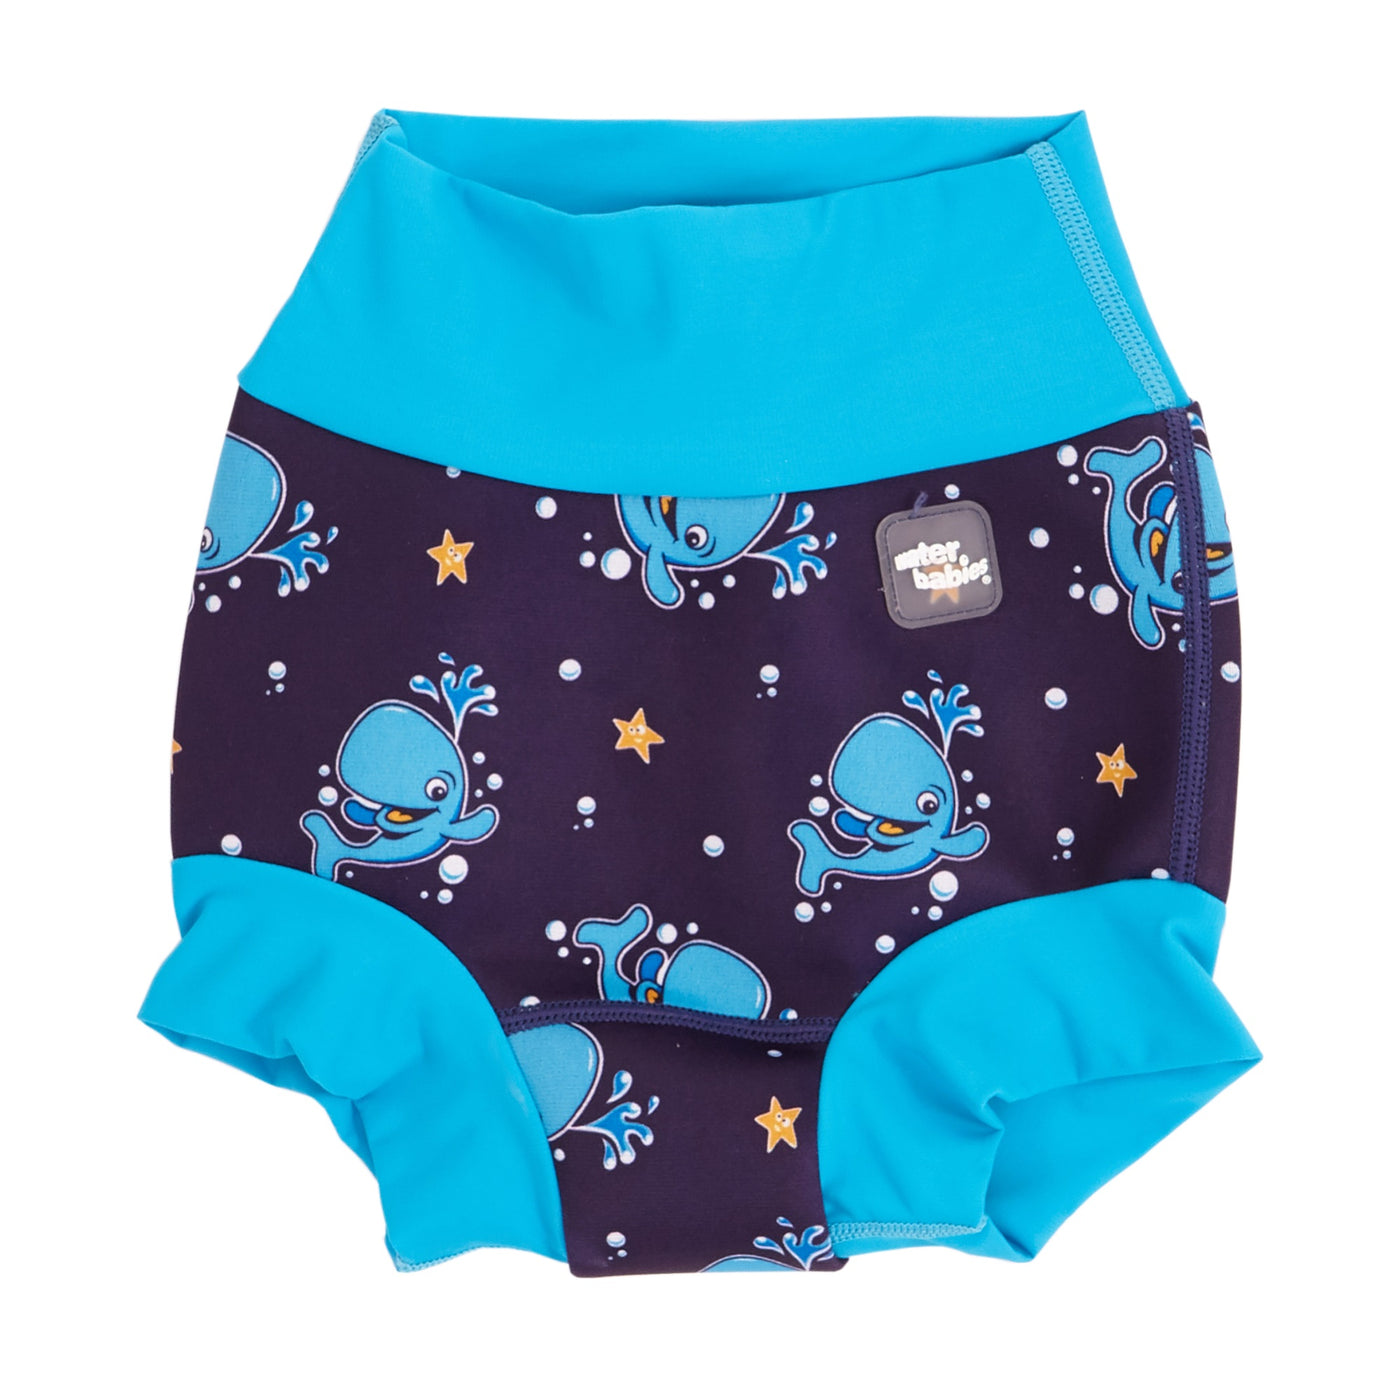 Baby swim nappy in blue Bubba the Whale print